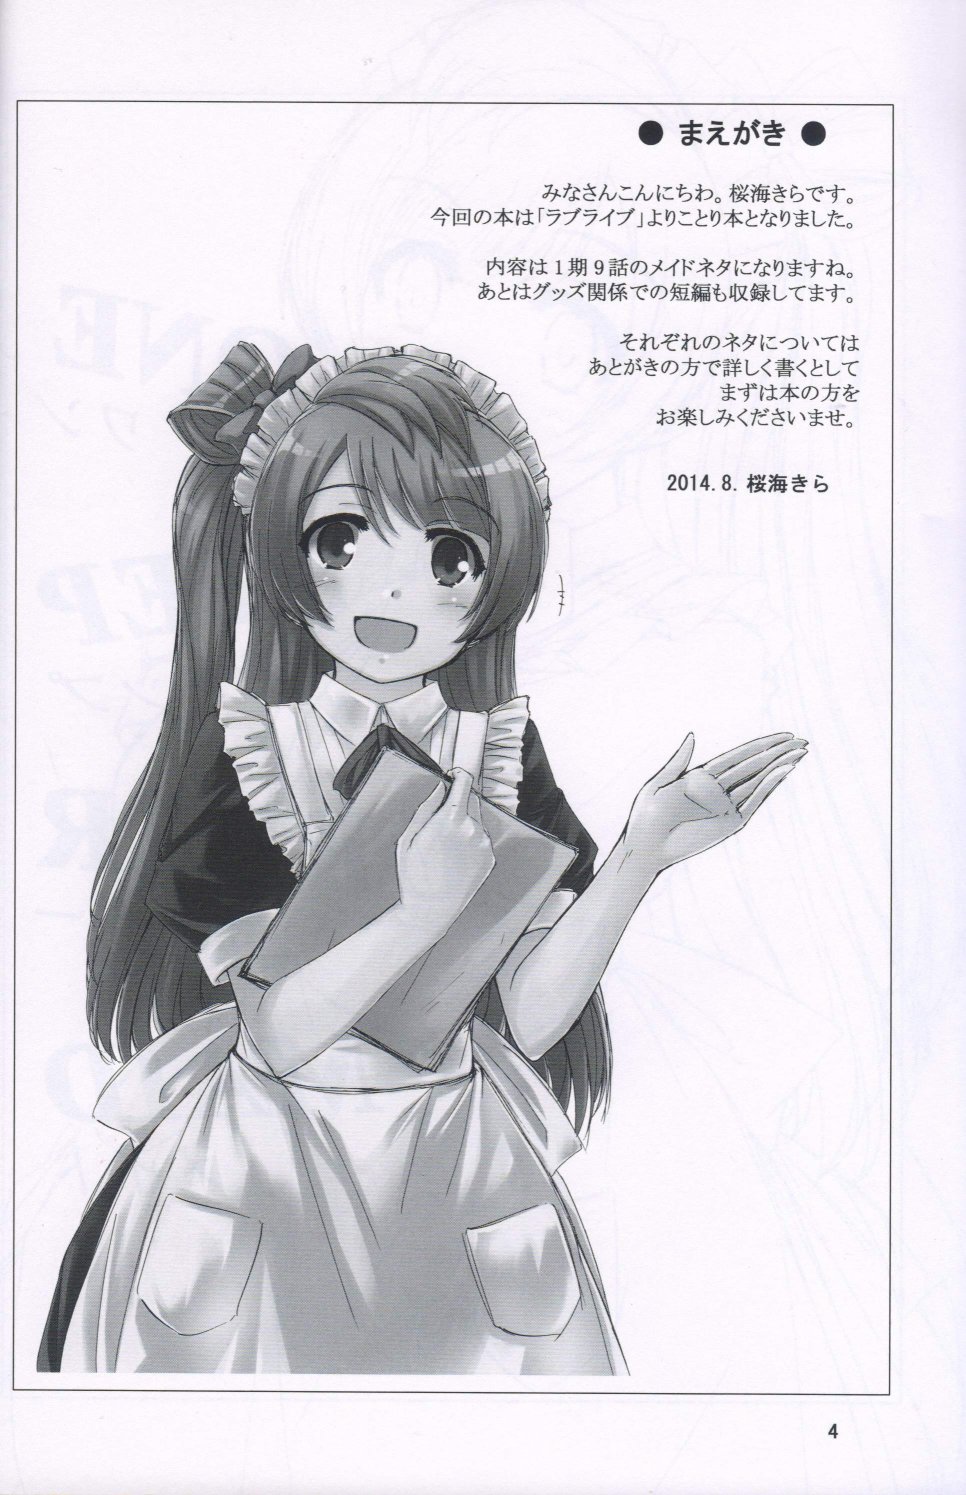 LoveLive - one step order maid - 3